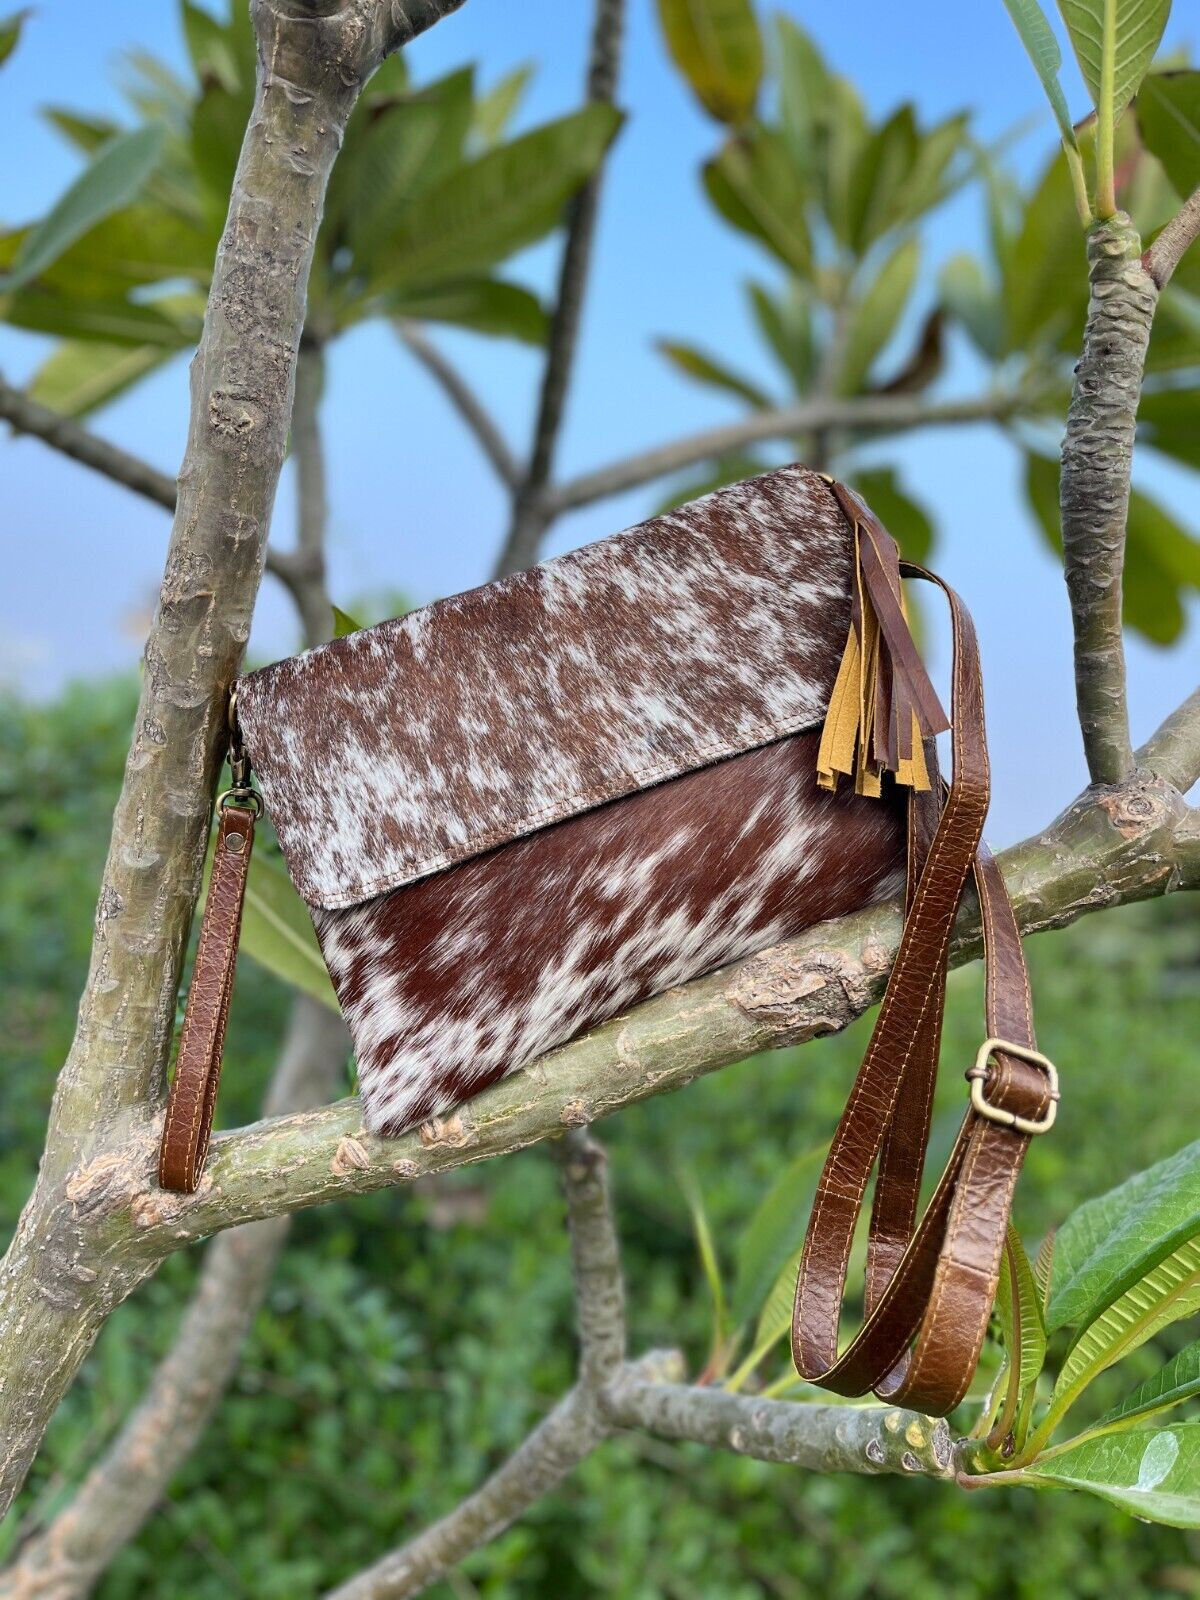 Brown White Speckled Cowhide Sling Purse